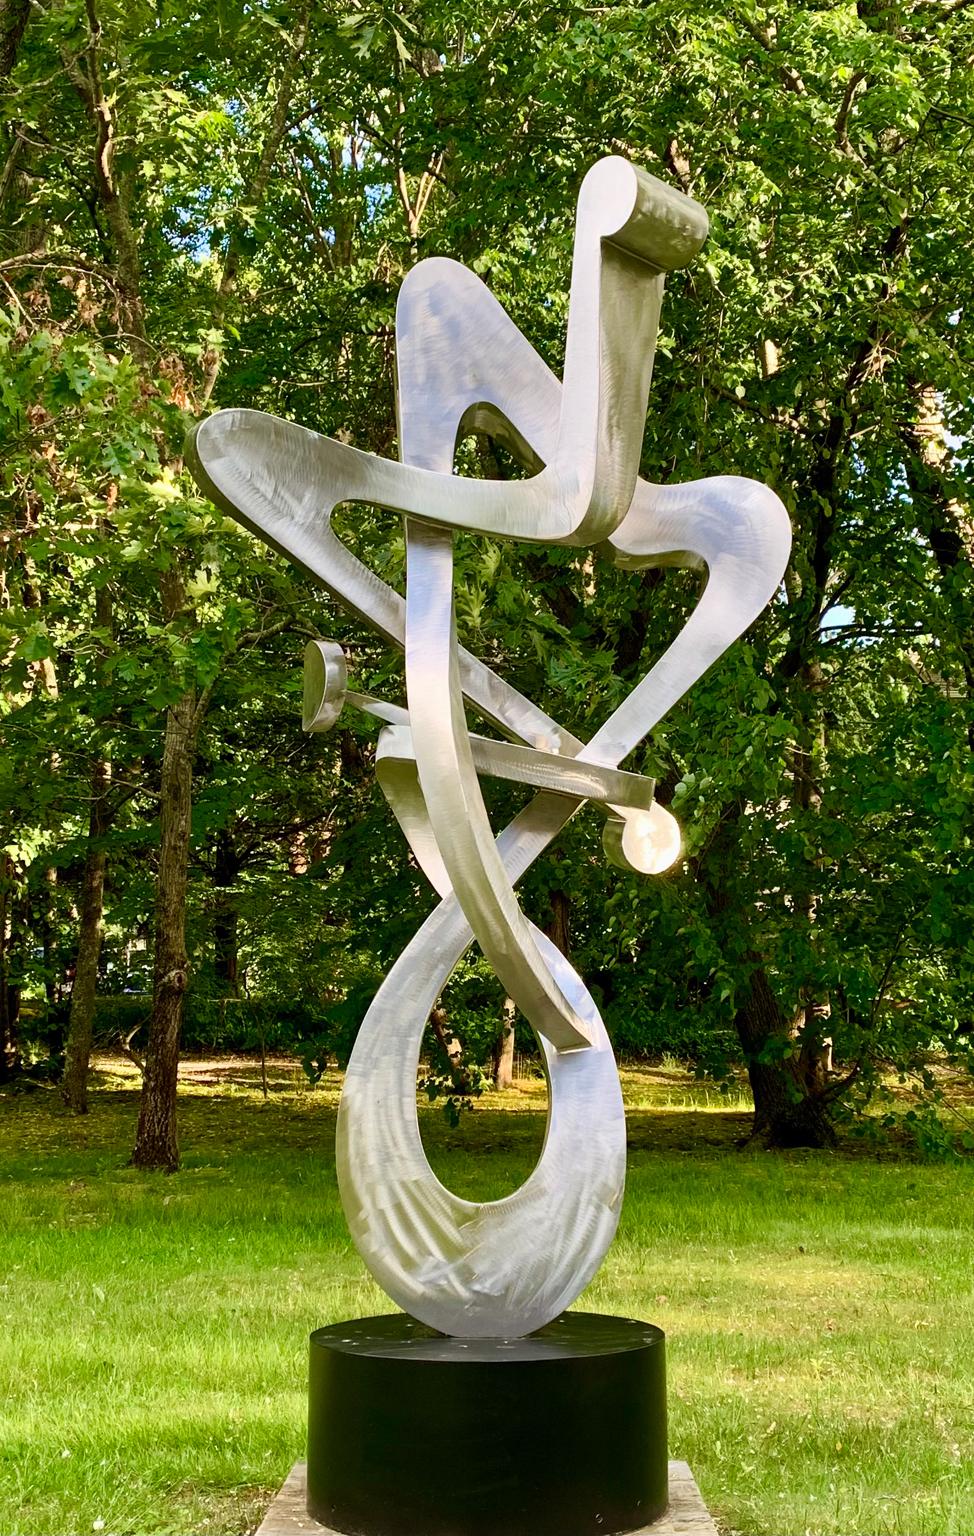 Kevin Barrett Abstract Sculpture - "Angel" Unique, Organic, Abstract Metal Sculpture in Stainless Steel